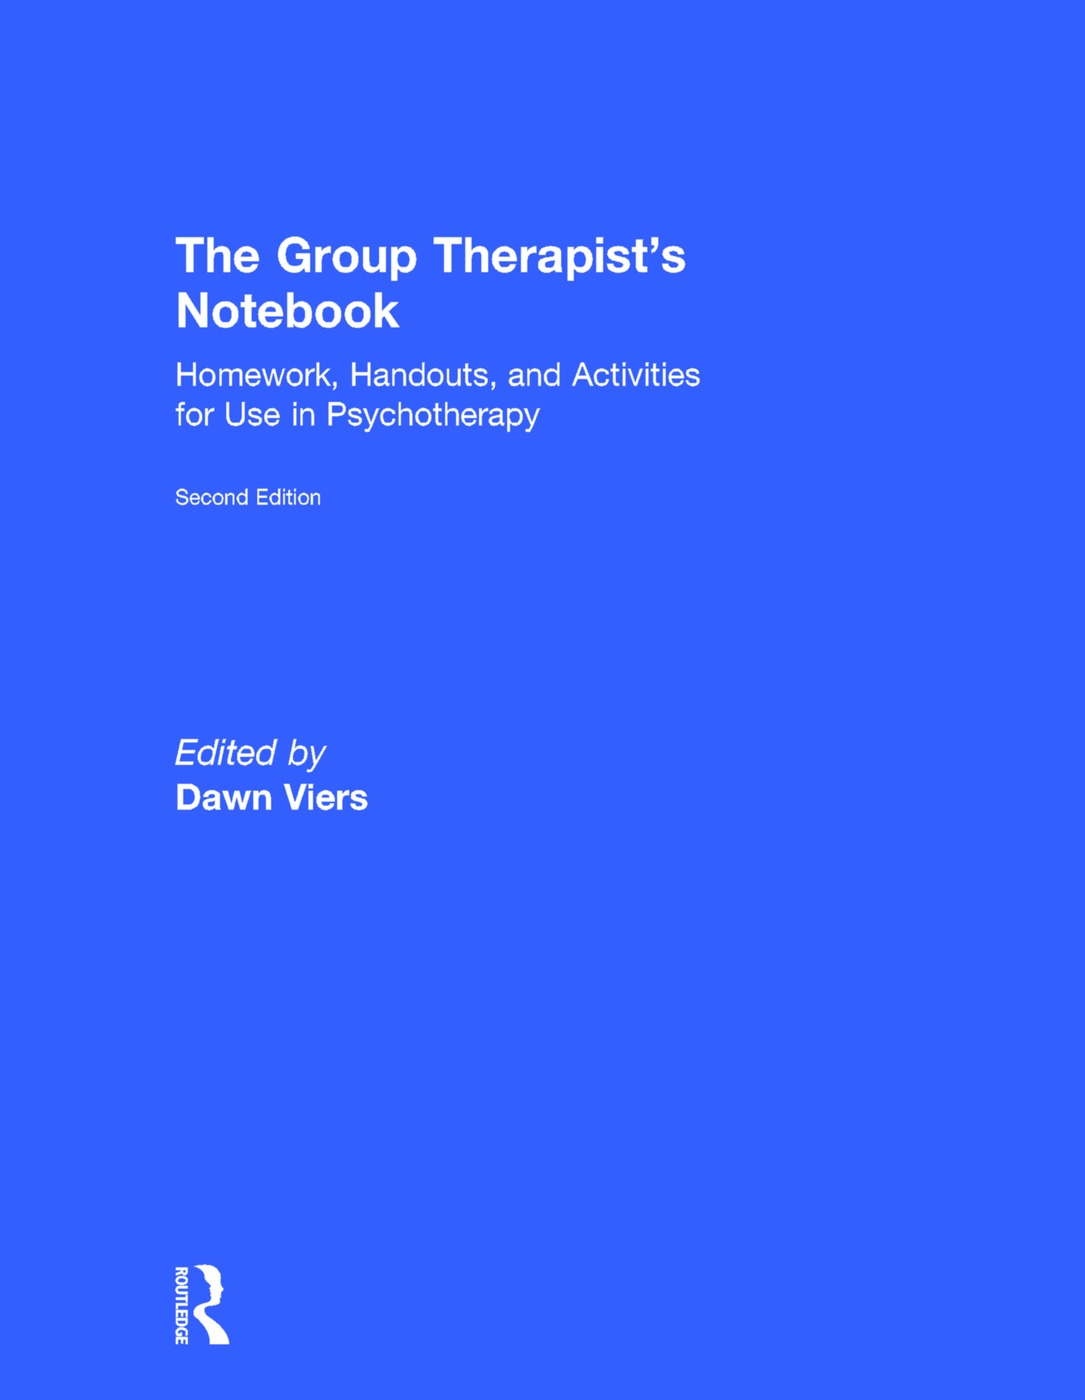 The Group Therapist’s Notebook: Homework, Handouts, and Activities for Use in Psychotherapy